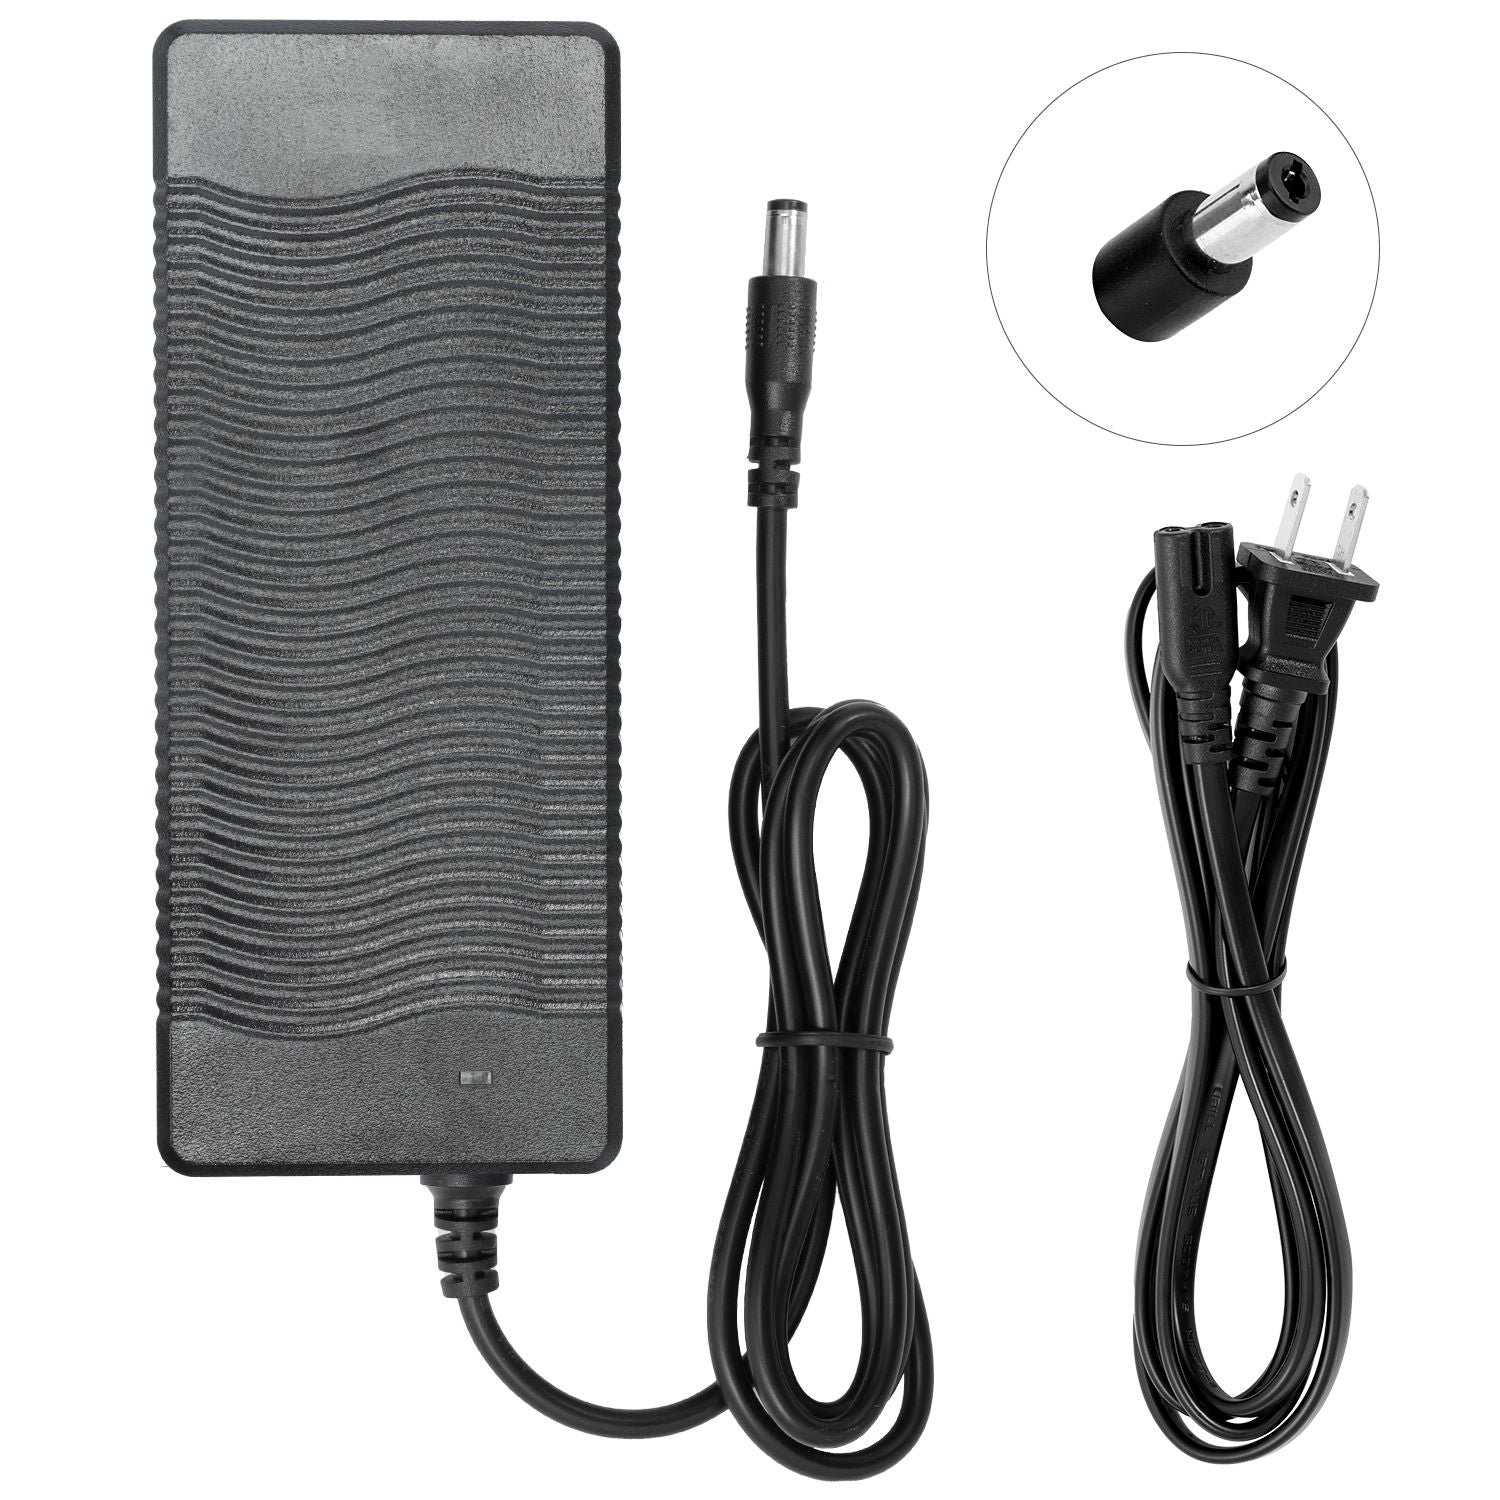 Charger for Rad Power RadMission 1 eBike